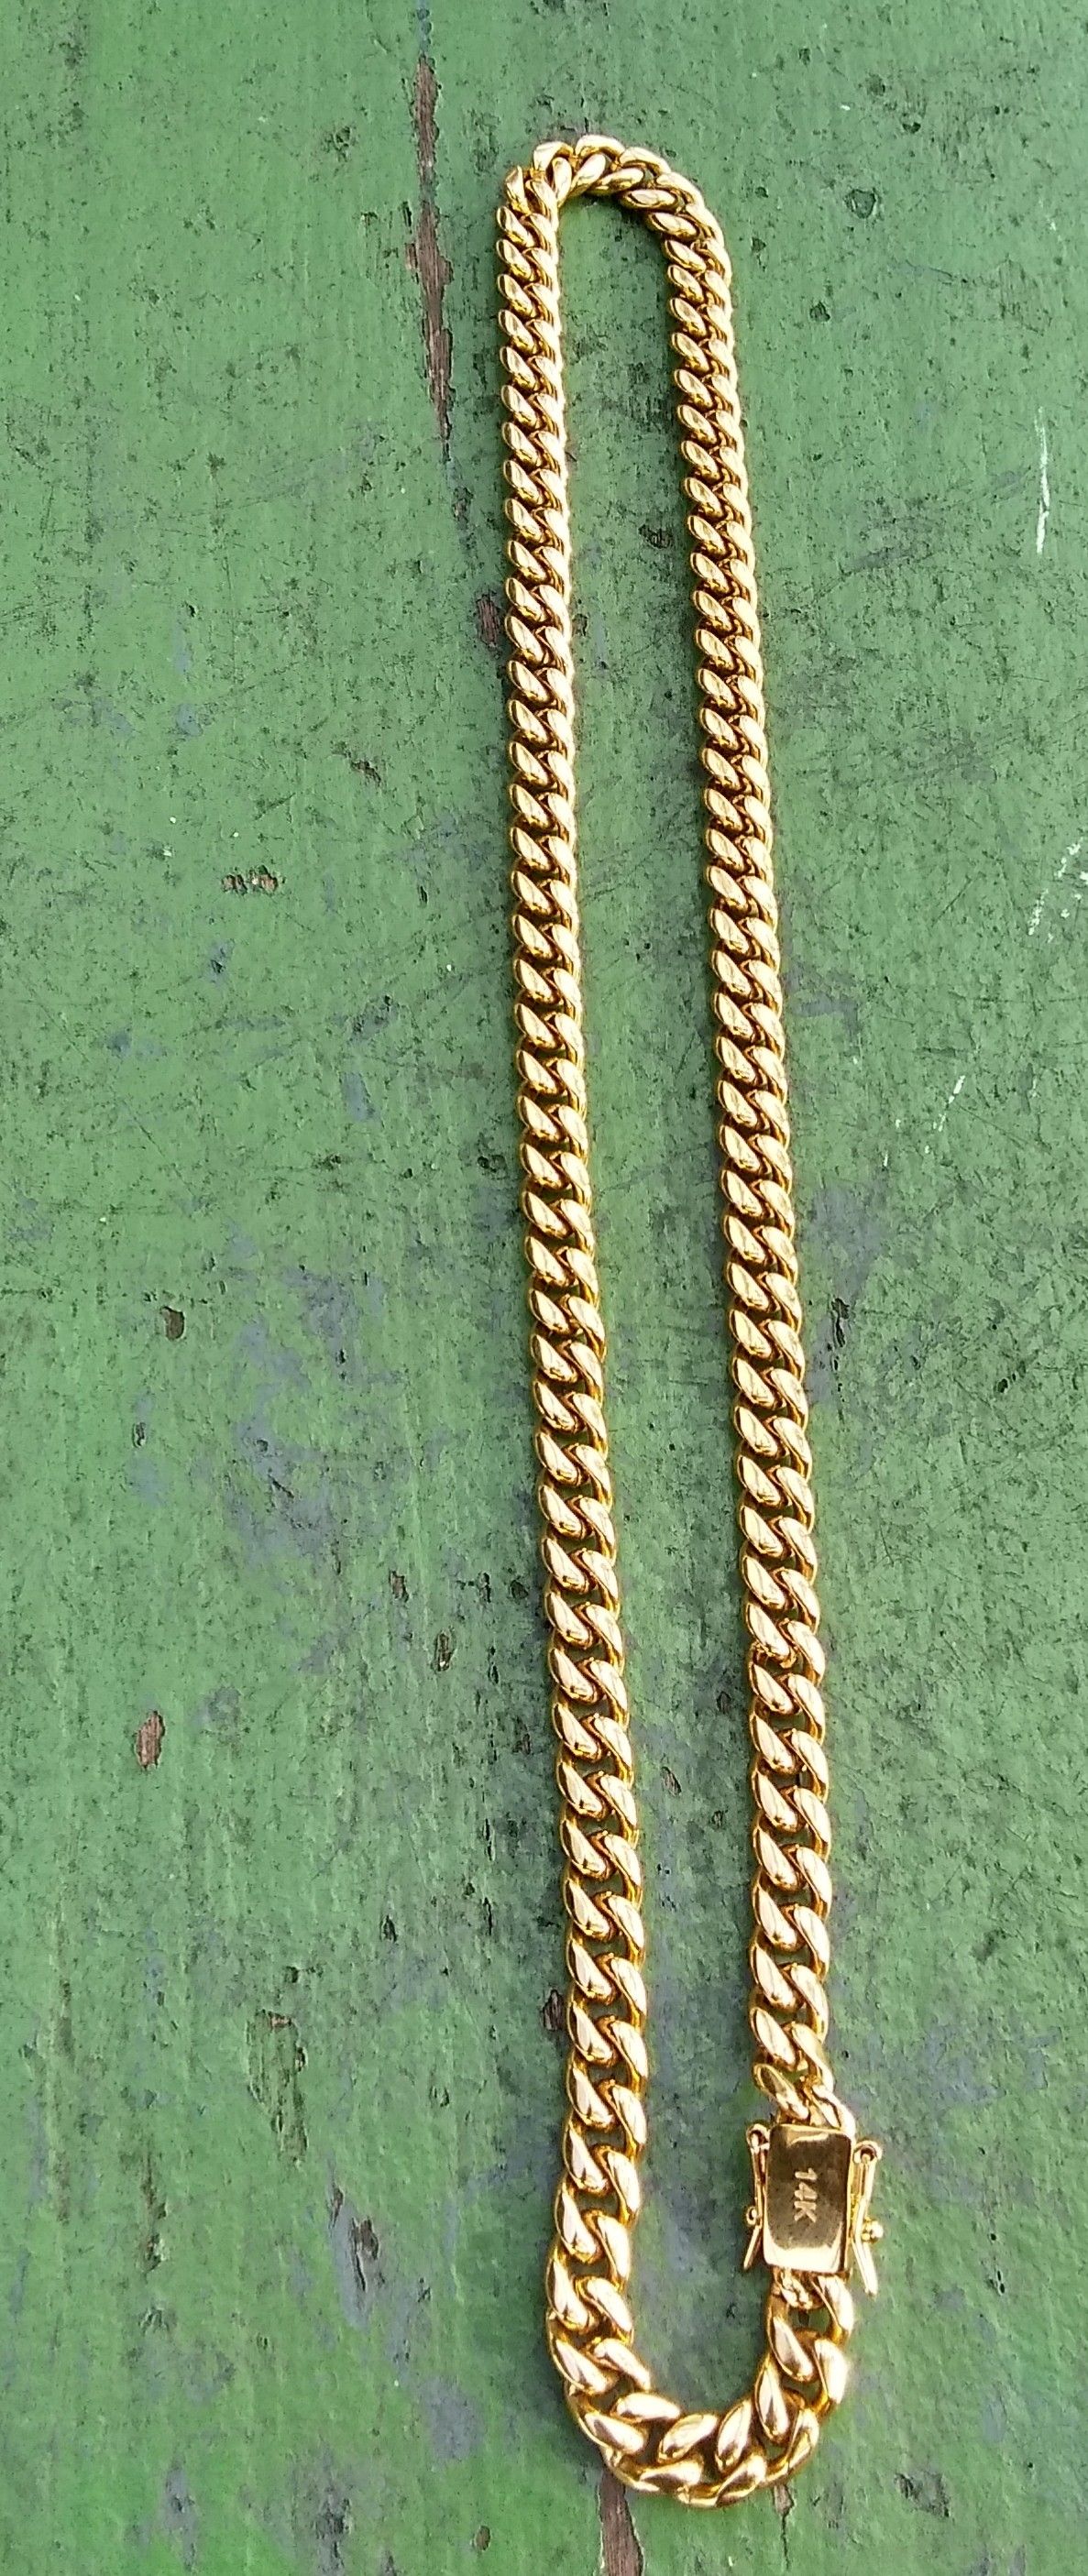 $75.....8mm 14k or 18k gold plated Cuban link chain.....Fast Shipping is available 🛫✈️🛬 or I deliver 🚗🏍️💭💭